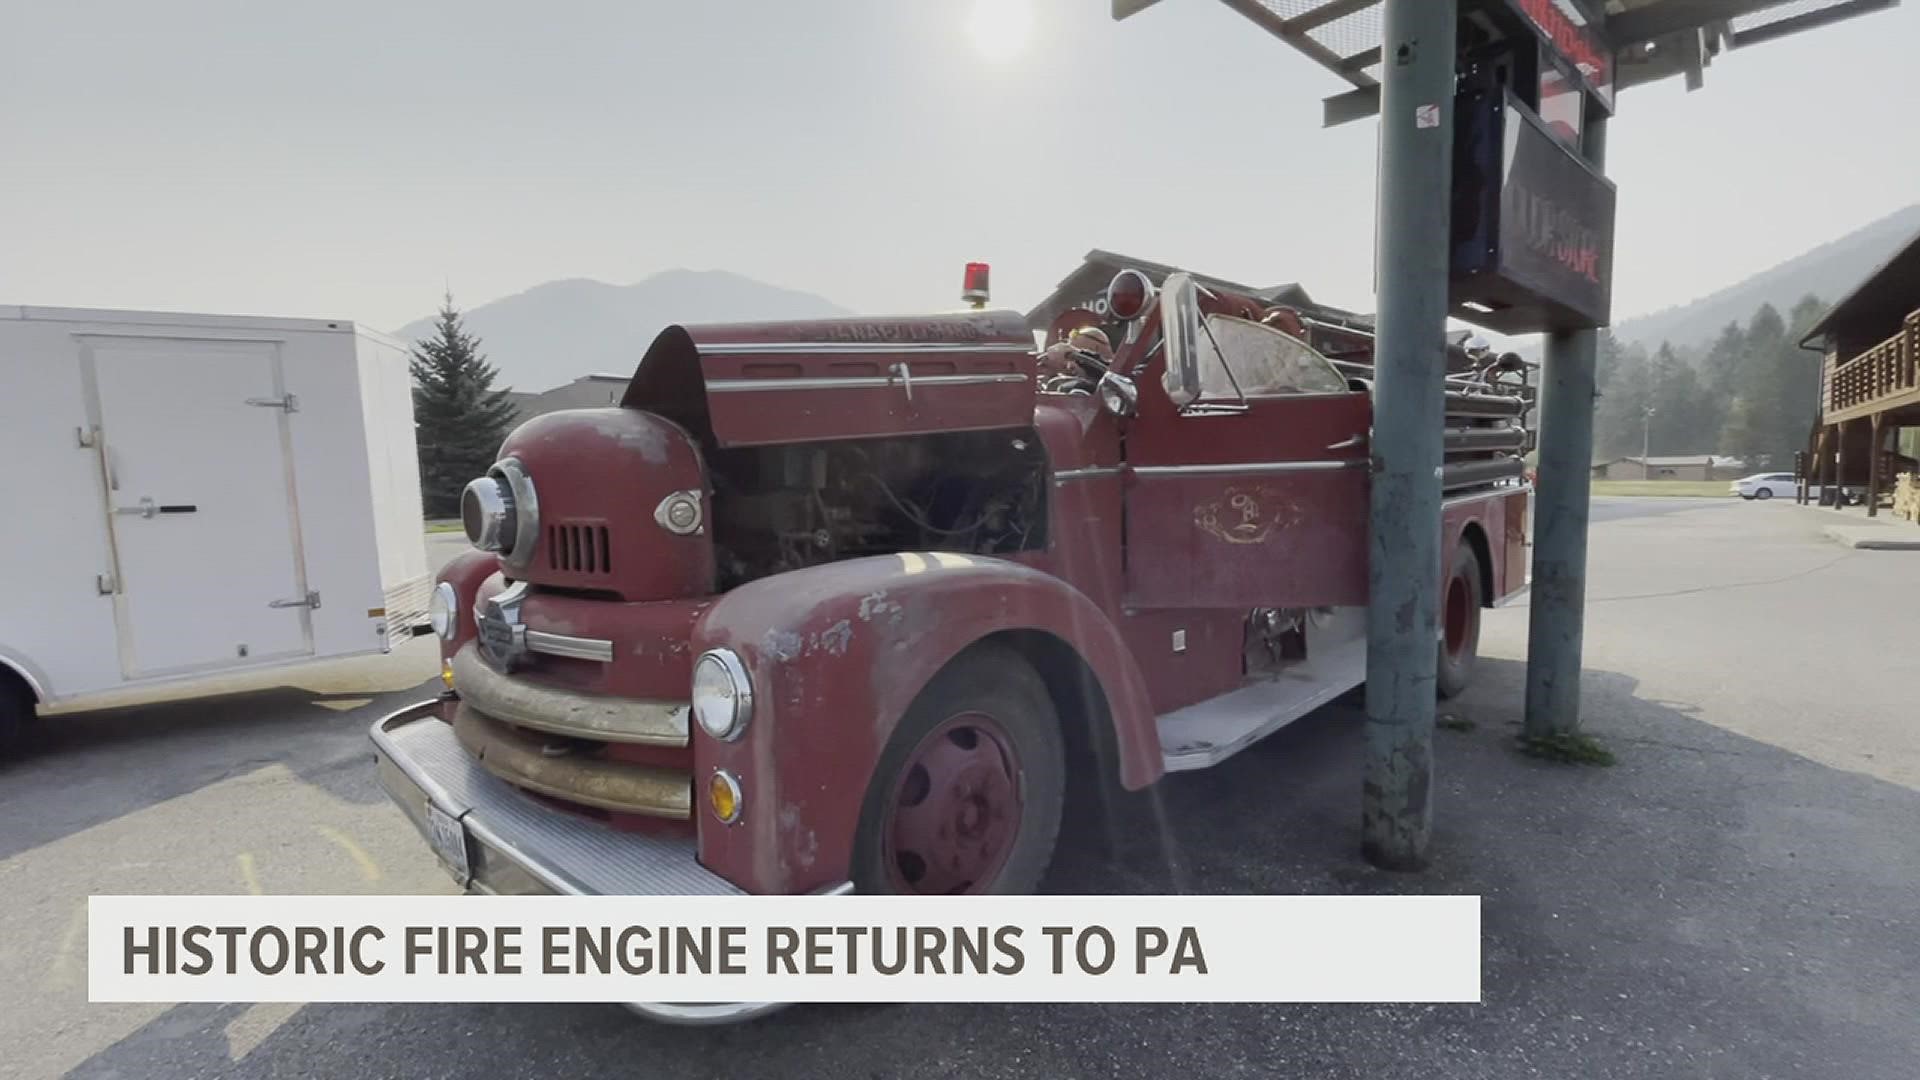 Photojournalist Drew Szala chronicles the return of an antique fire engine from Wyoming to Bendersville, Adams County.